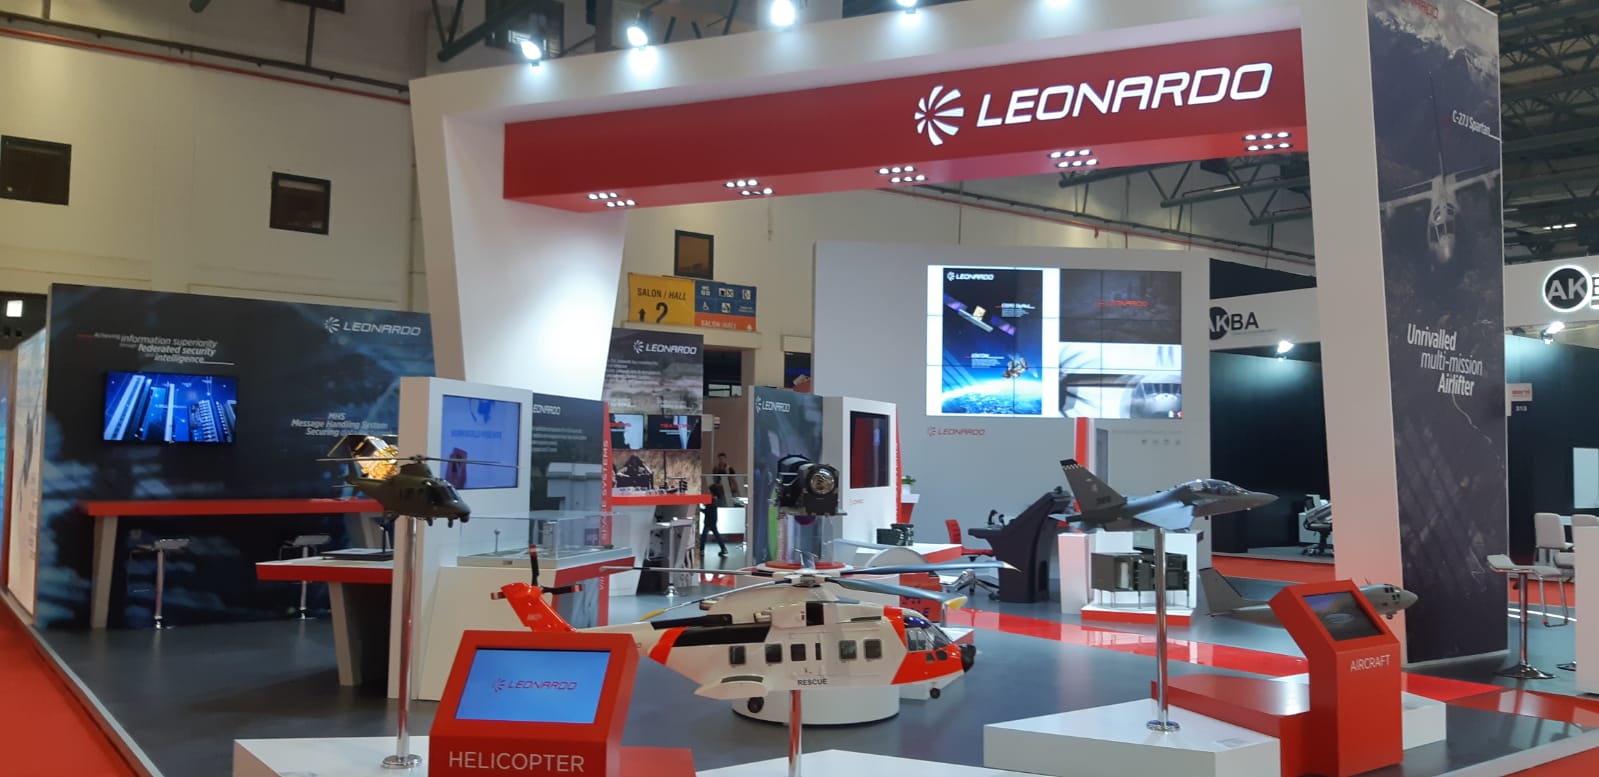 Leonardo is emphasising the breadth of its product and service range at IDEF 2019 in Istanbul this week, while focusing attention on a number of specific domains. Enhanced services are core to Leonardo’s offer in Turkey. Leveraging decades of experience in